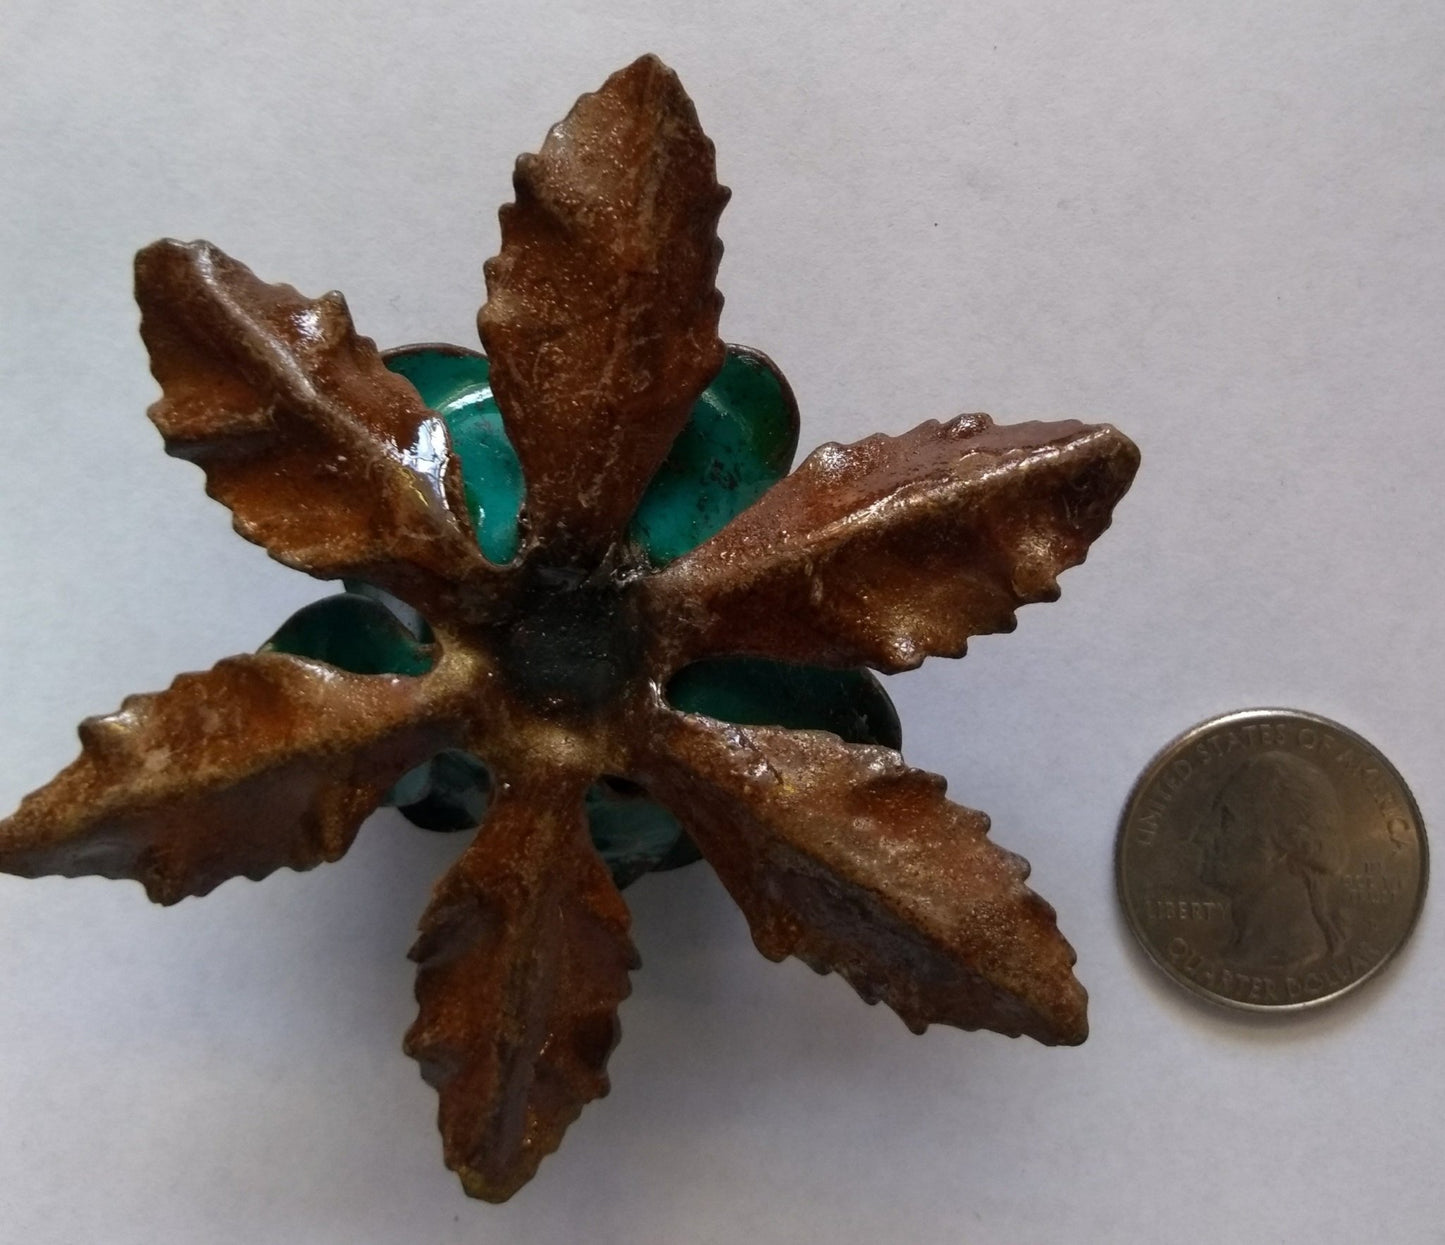 Metal Flower Blue/Green Color (1 Piece) - Krafts and Beads